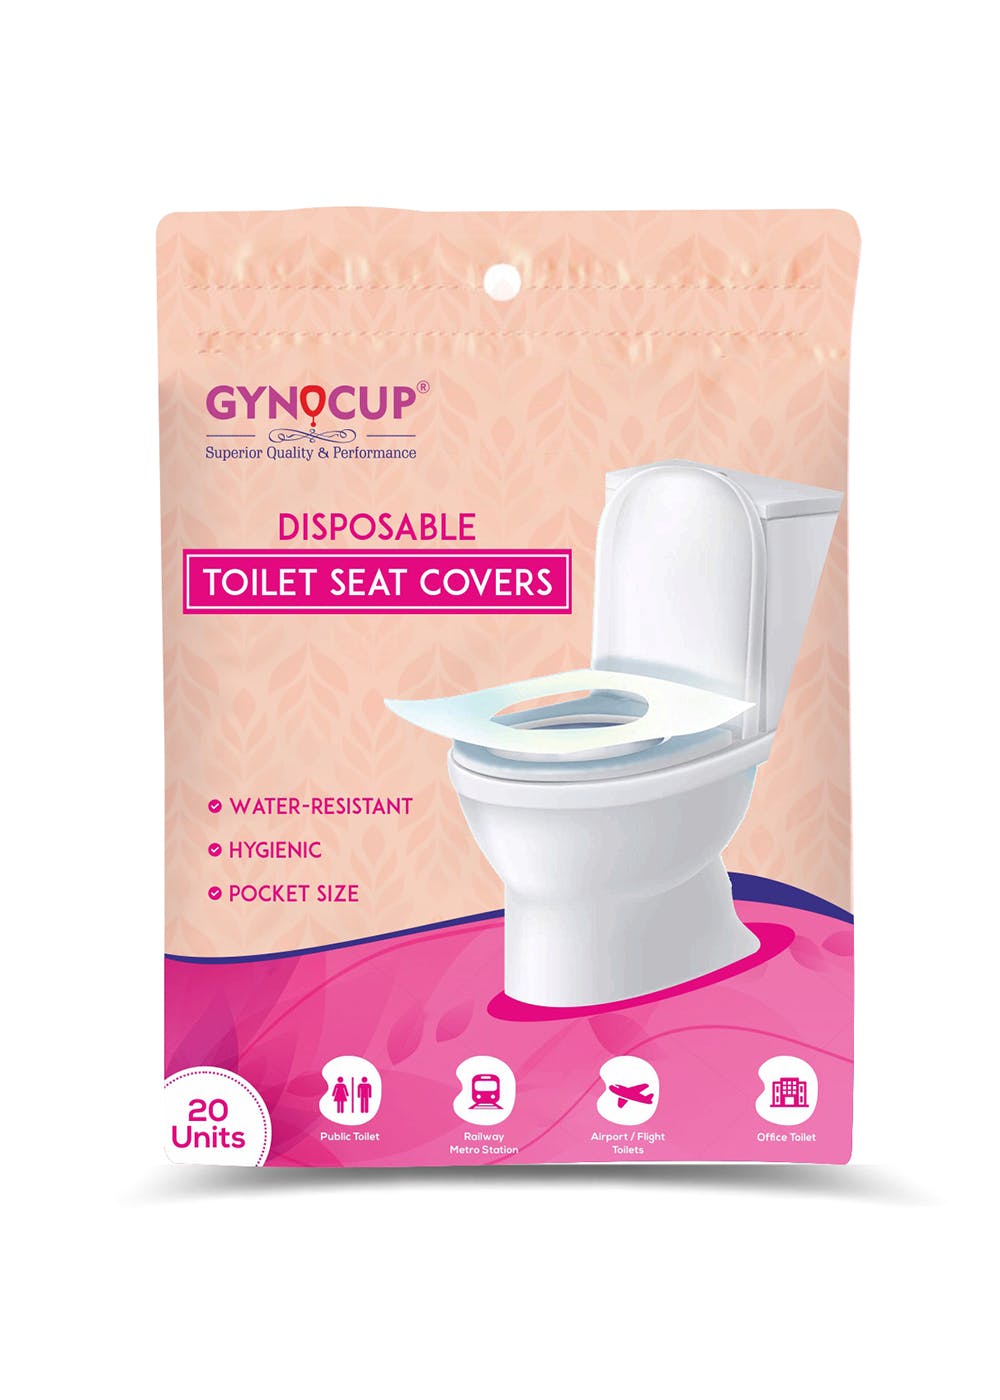 Get Disposable Toilet Seat Covers 20, Bathroom Seat Covers